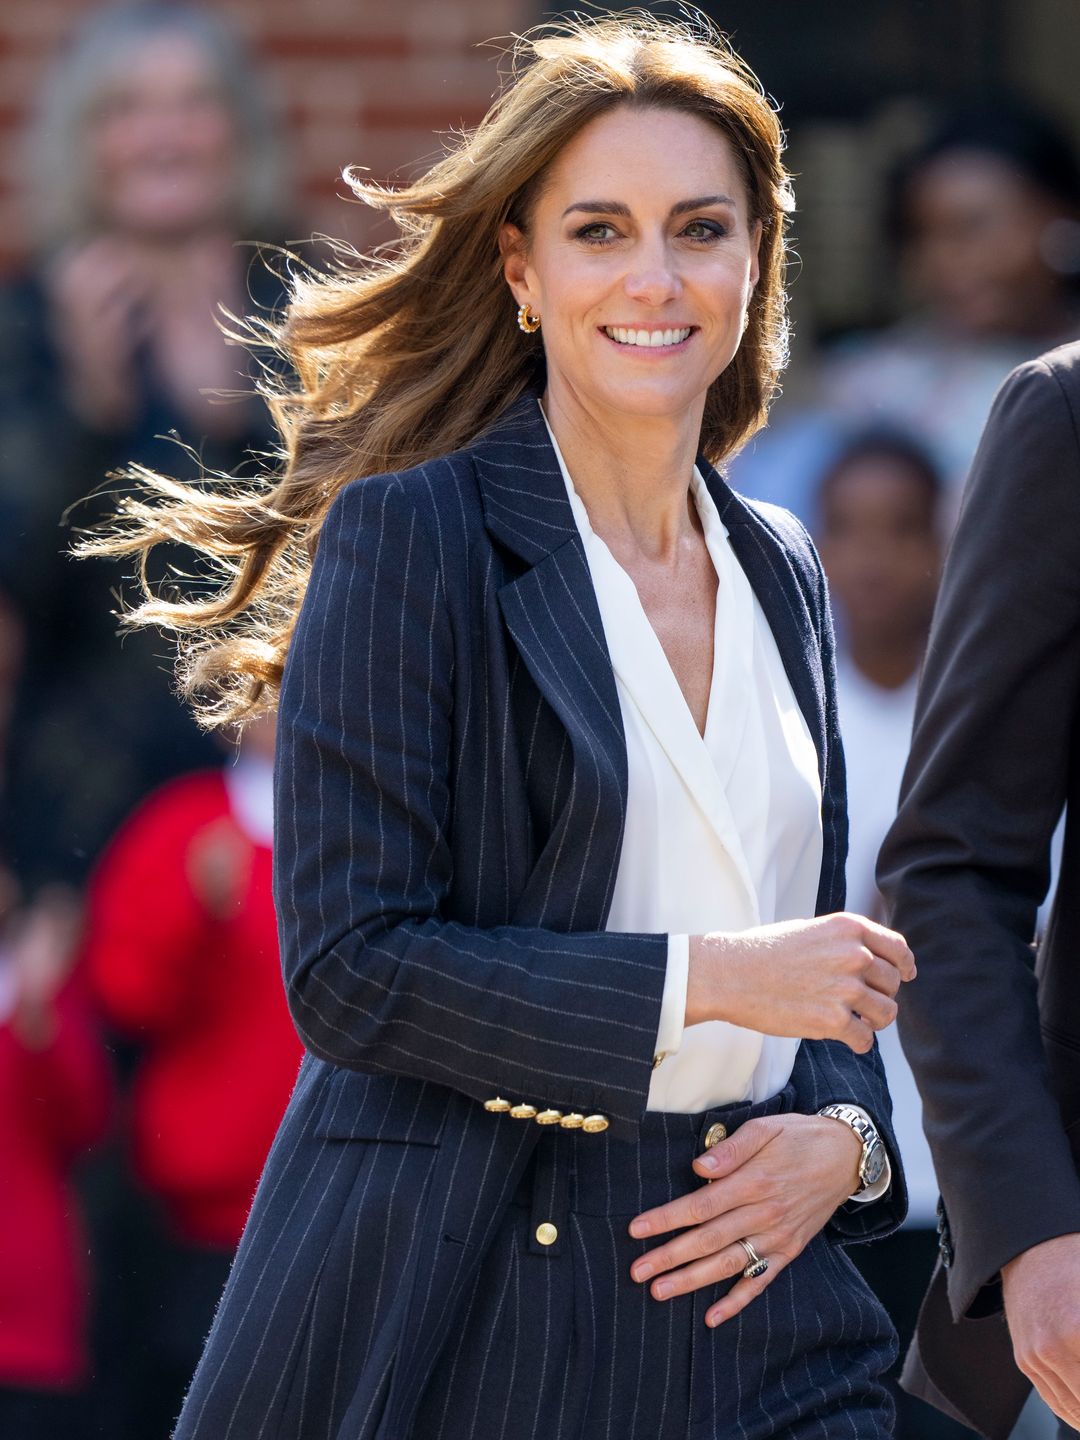 The Princess of Wales wearing a Holland Cooper pinstripe suit